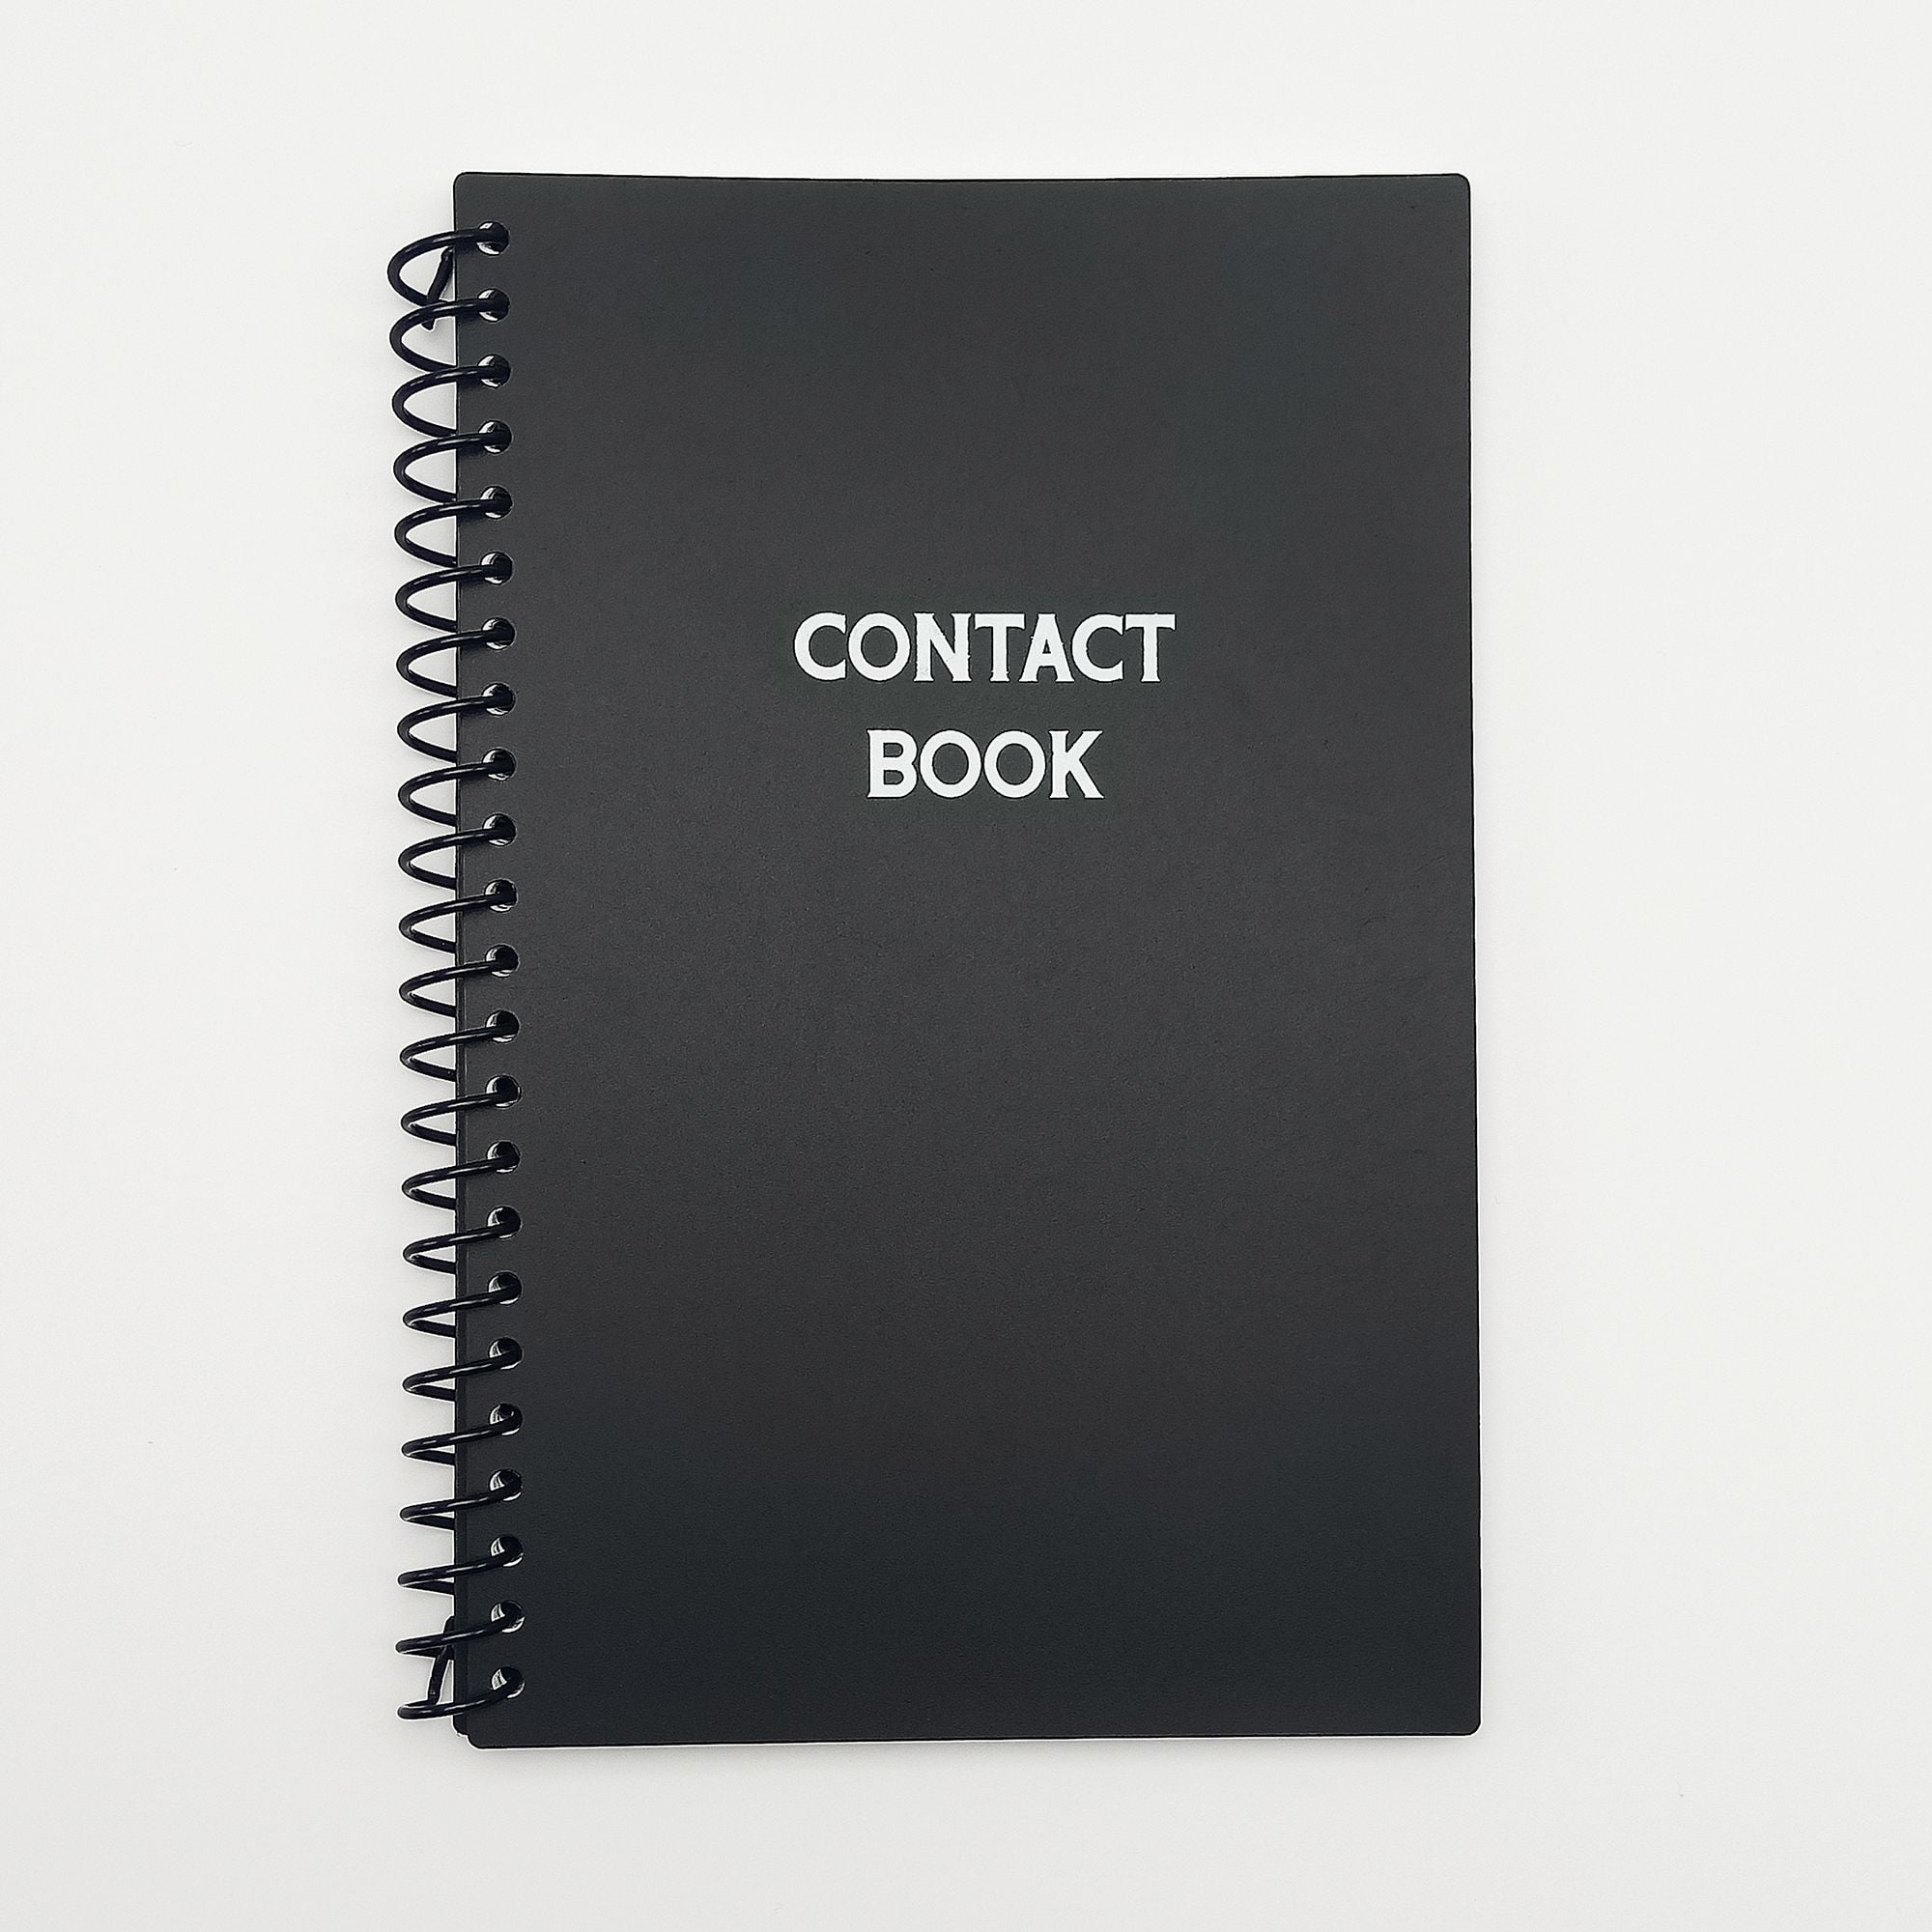 Pen+Gear Pen + Gear Contact Book, Black Poly Cover, Spiral Binding, 128 Pages, Alphabet Tabs